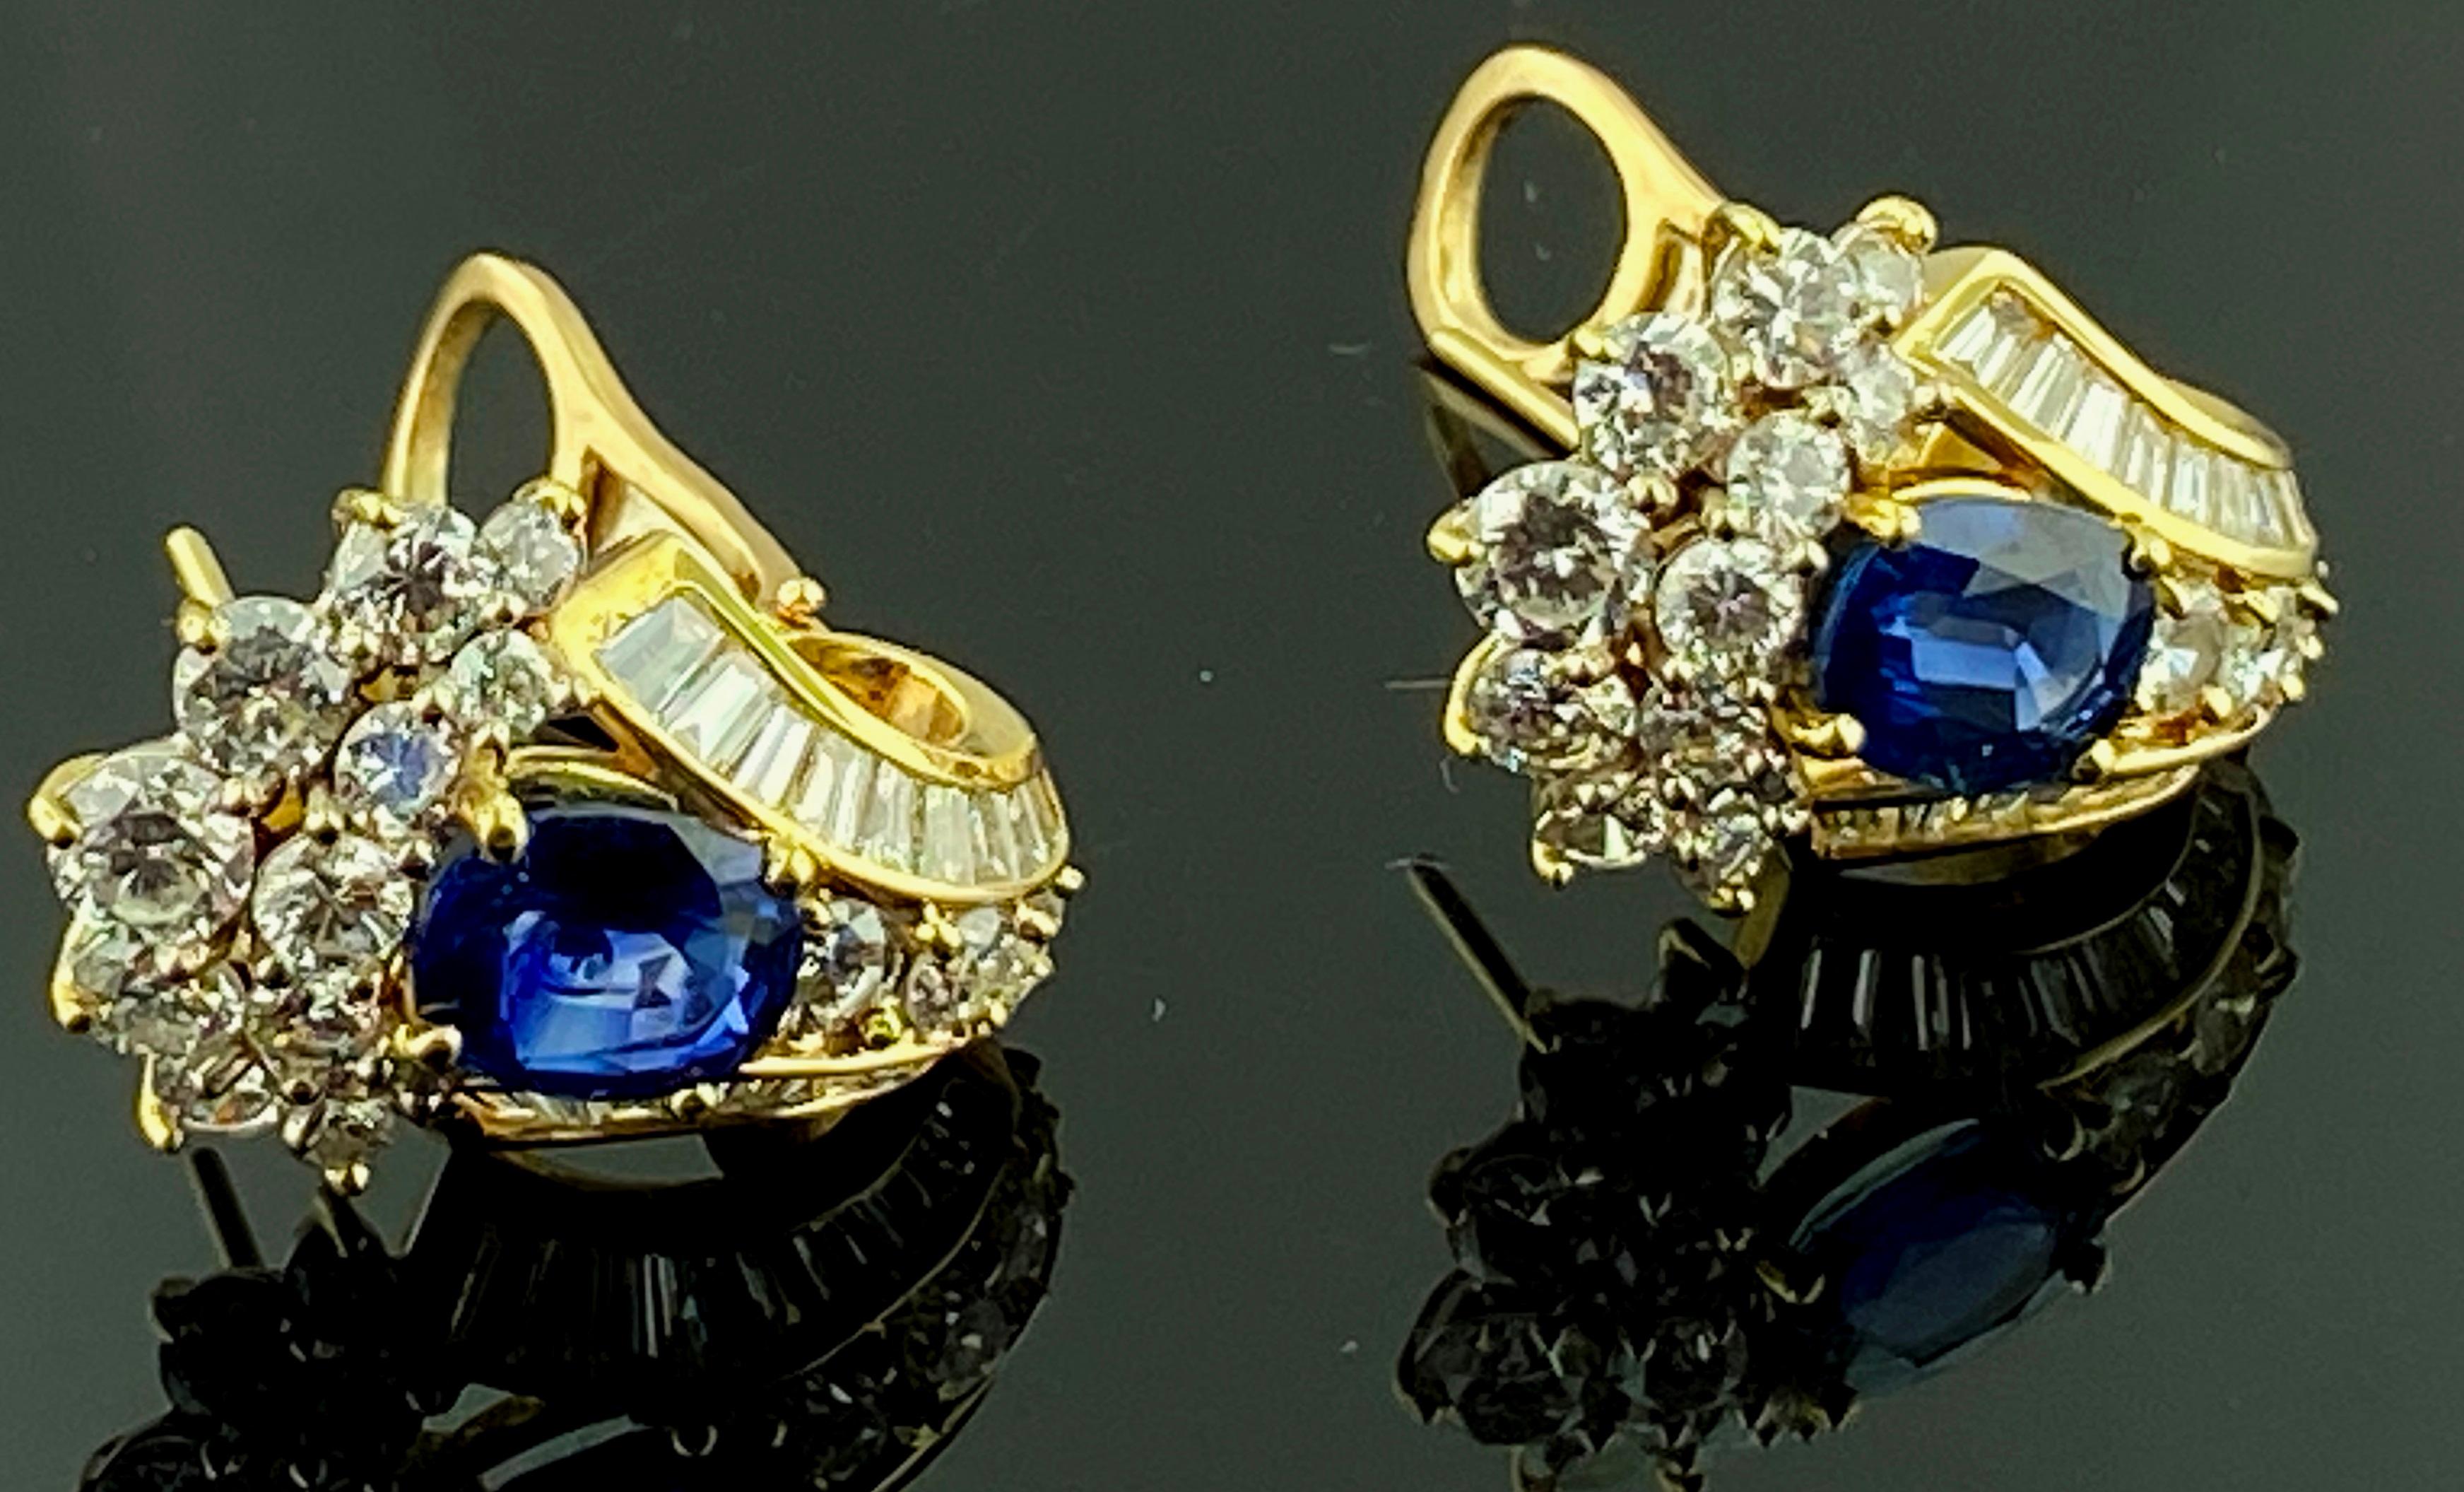 Set in 18 karat yellow gold are two Oval shaped Natural Blue Sapphires with a total weight of 2.58 carats.  Surrounding the Sapphires are 30 round brilliant cut diamonds and 36 baguette cut diamonds for a total diamond weight of 4.22 carats.